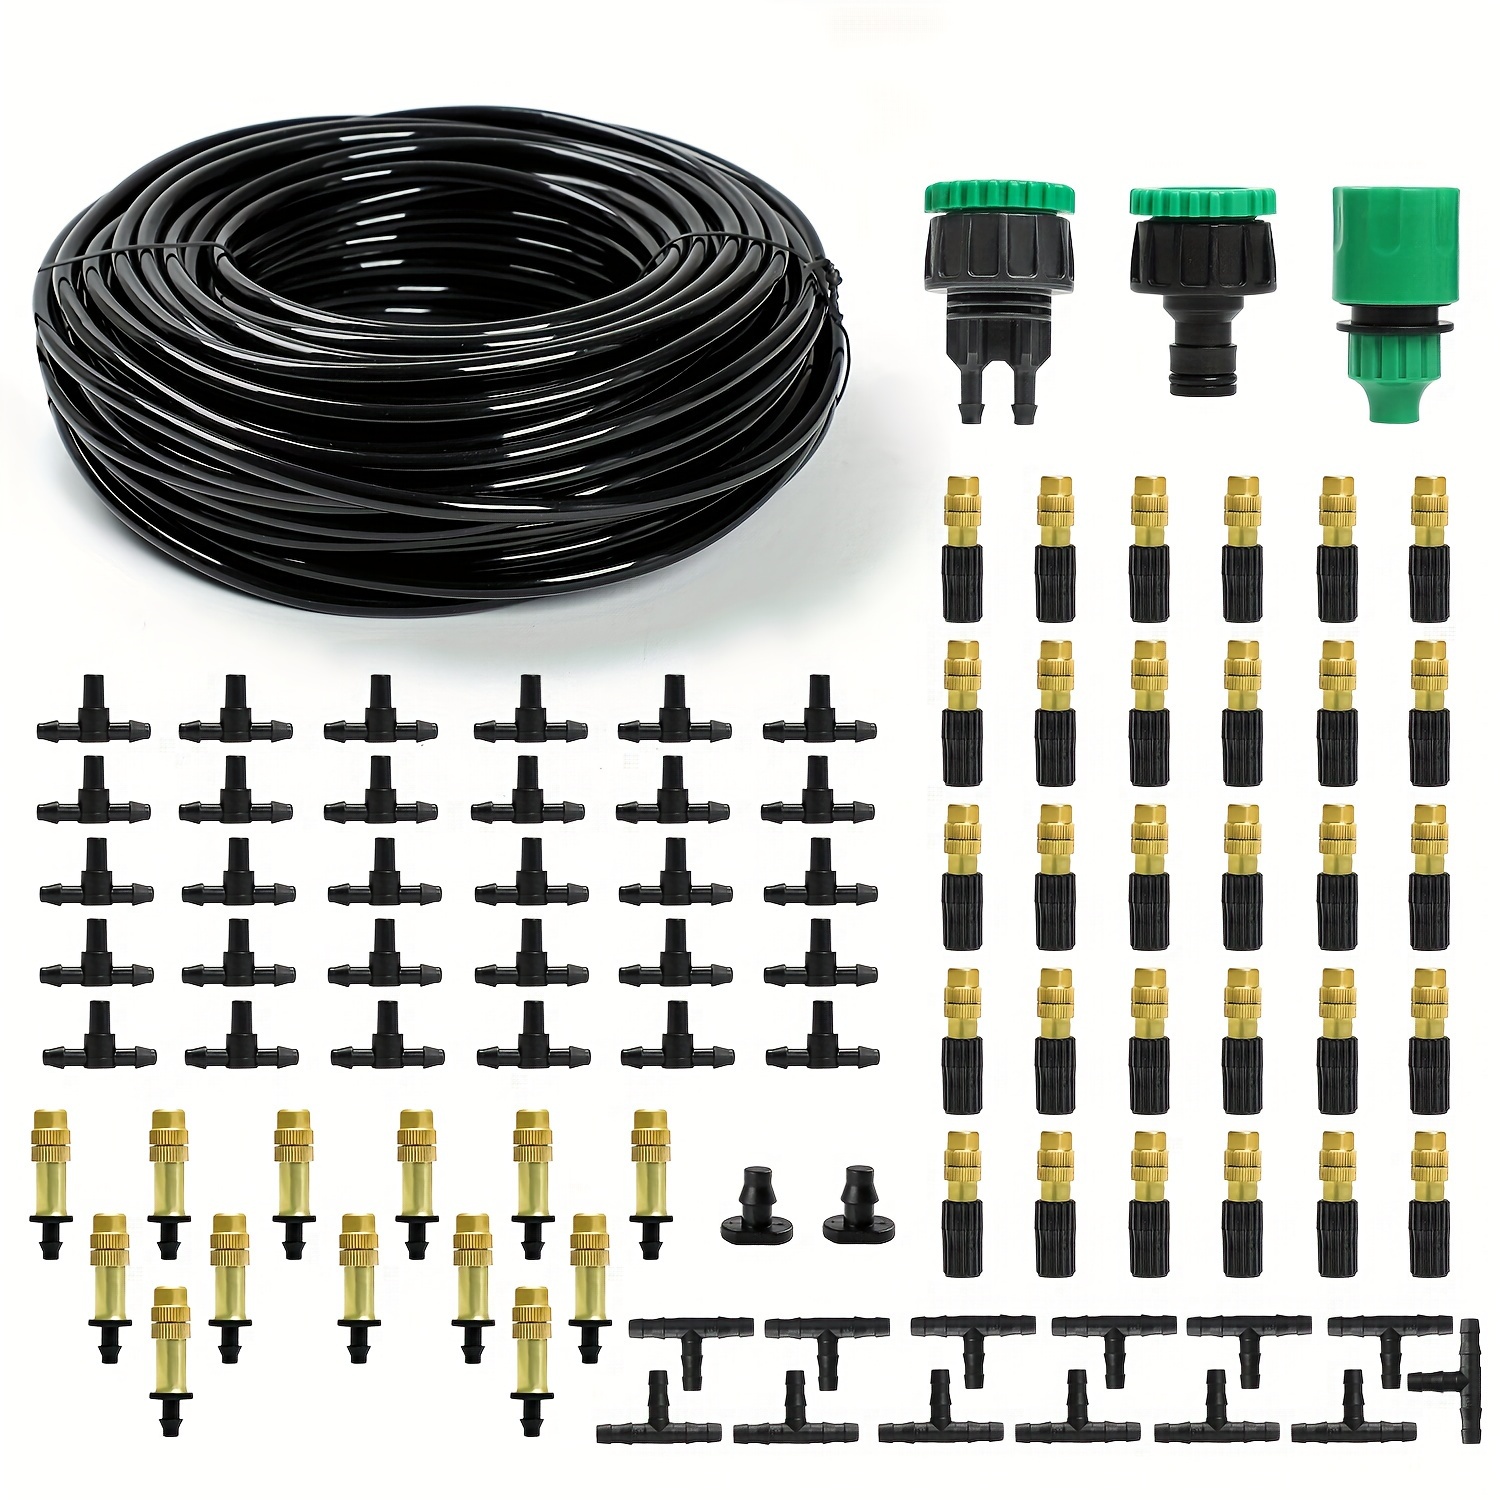 

98ft Outdoor Kit With 43 Brass Nozzles, Adjustable Mist Cooling Technology, Easy Installation, Metal Durable Hose - Ideal For Garden, Greenhouse, Backyard Cooling